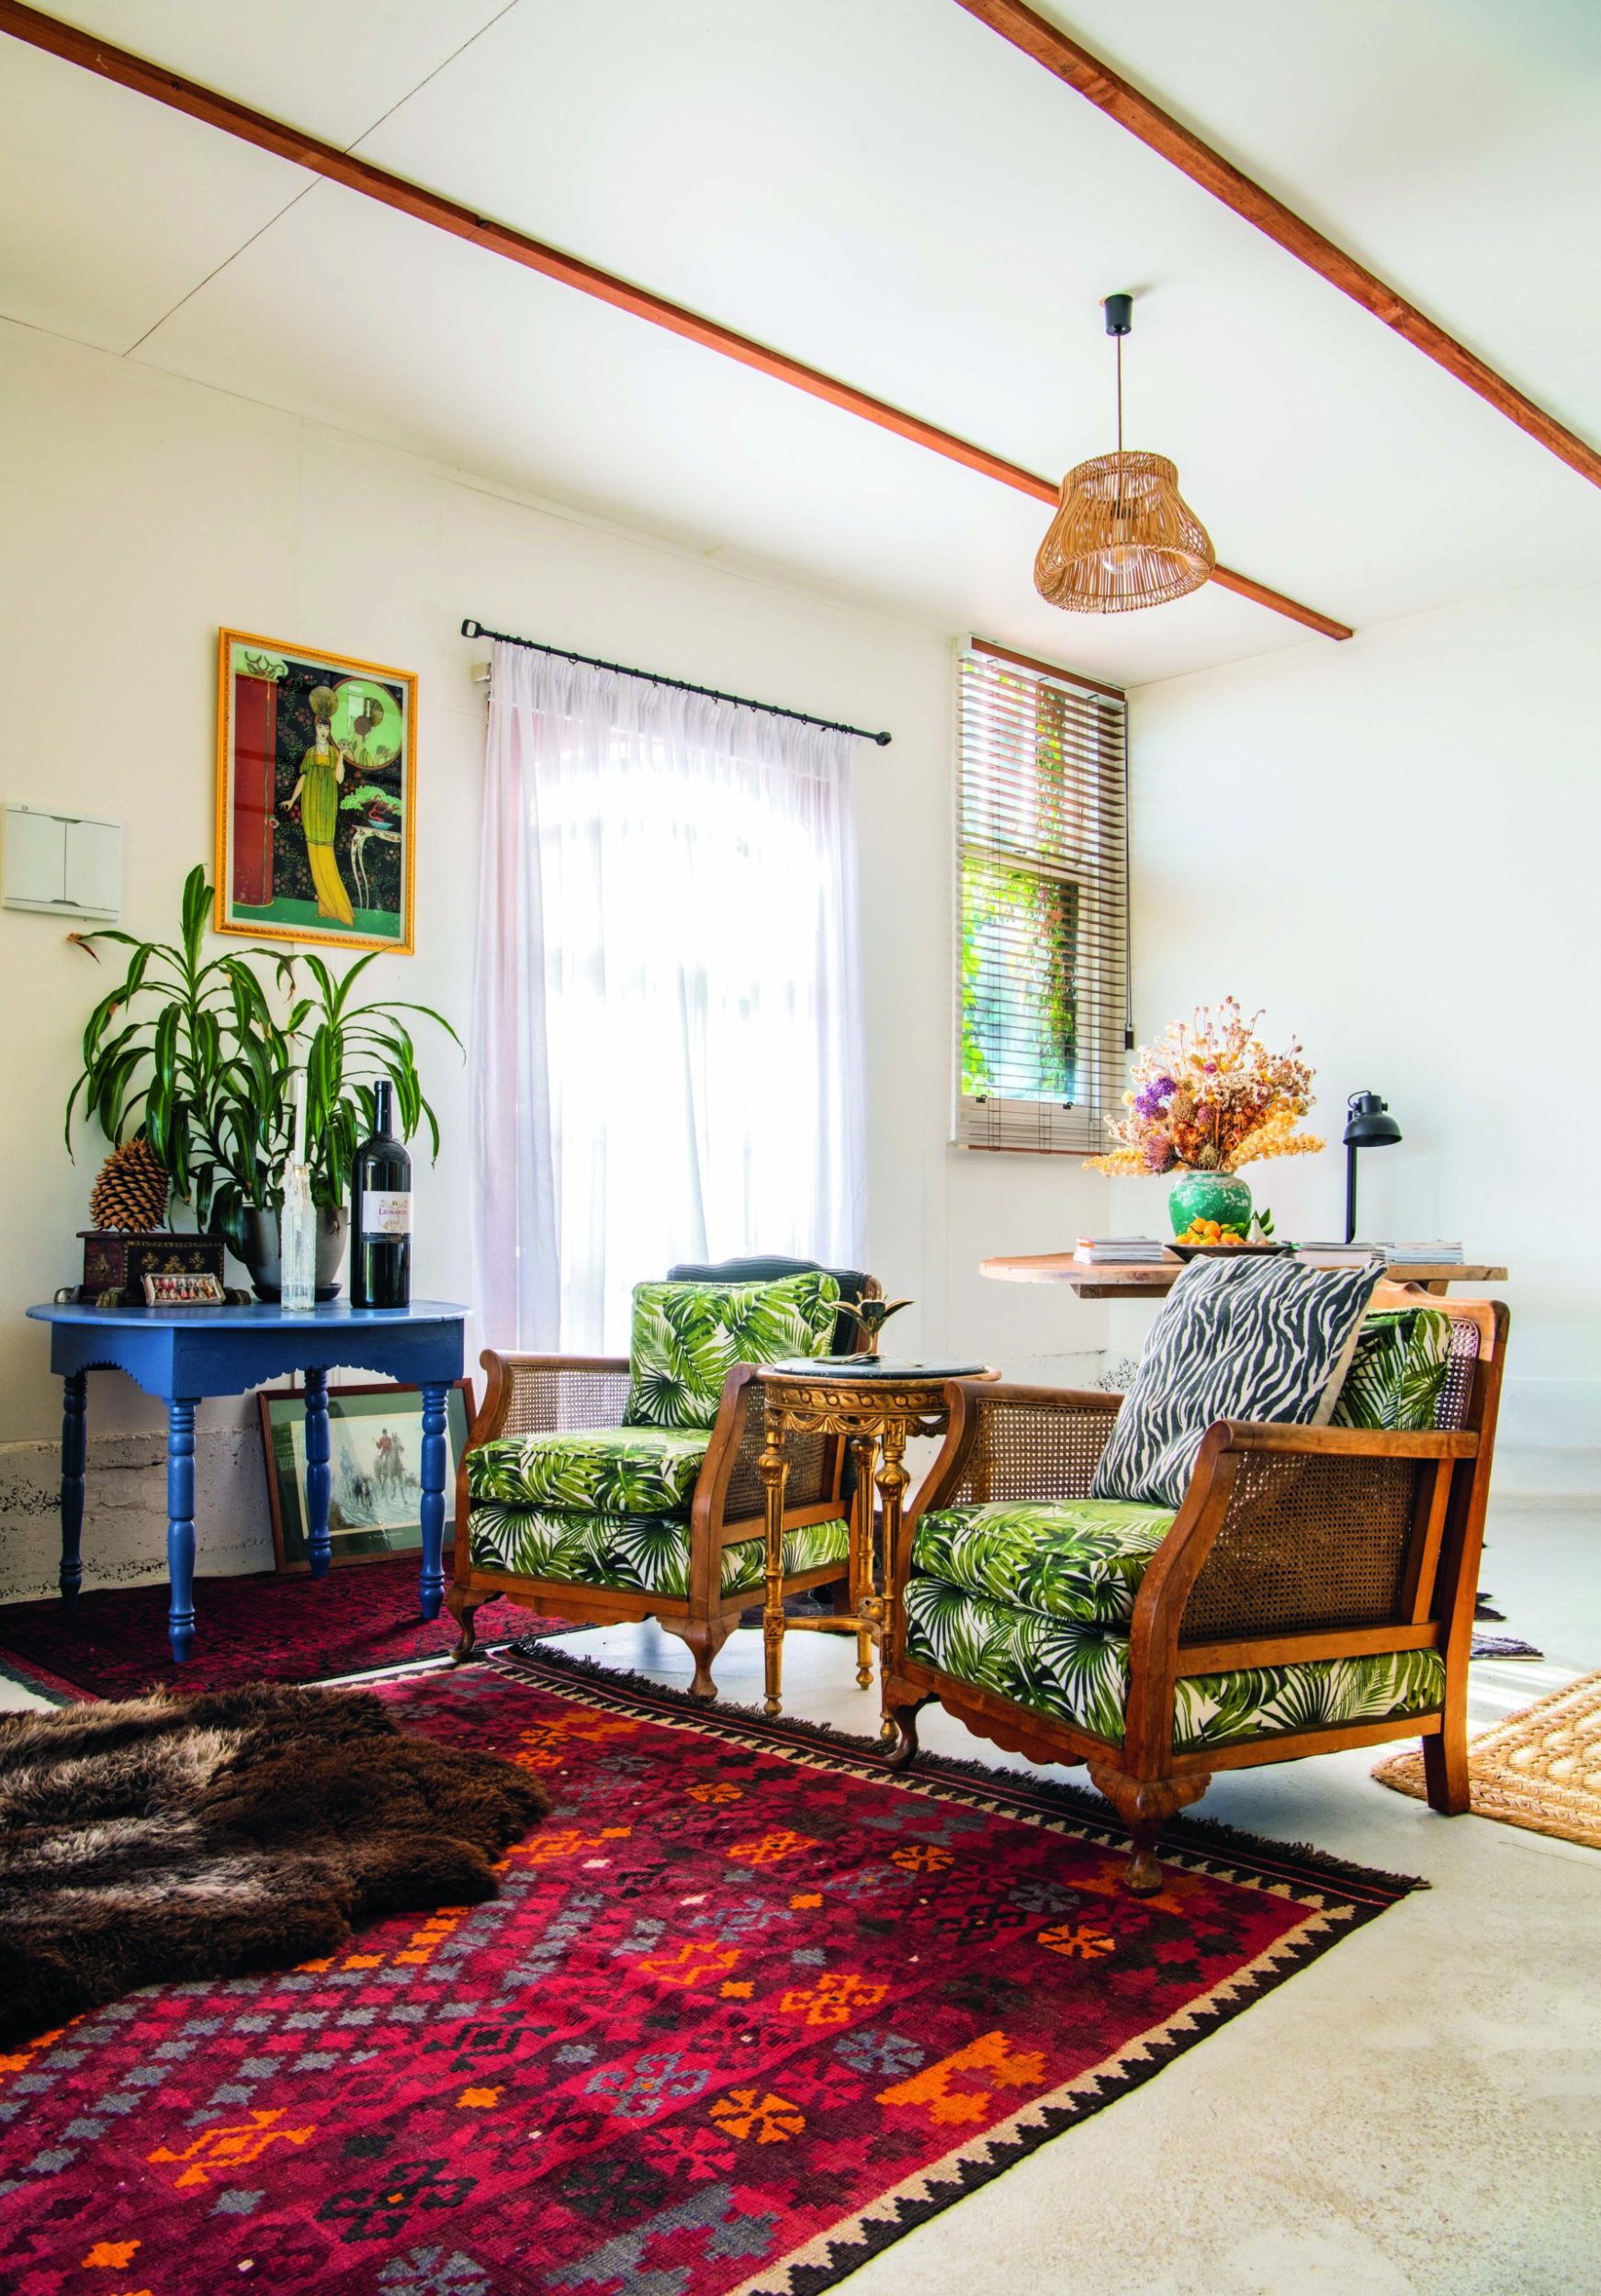 A living room with a red boho rug, green botanical patterned chairs, a blue side table and wooden beams